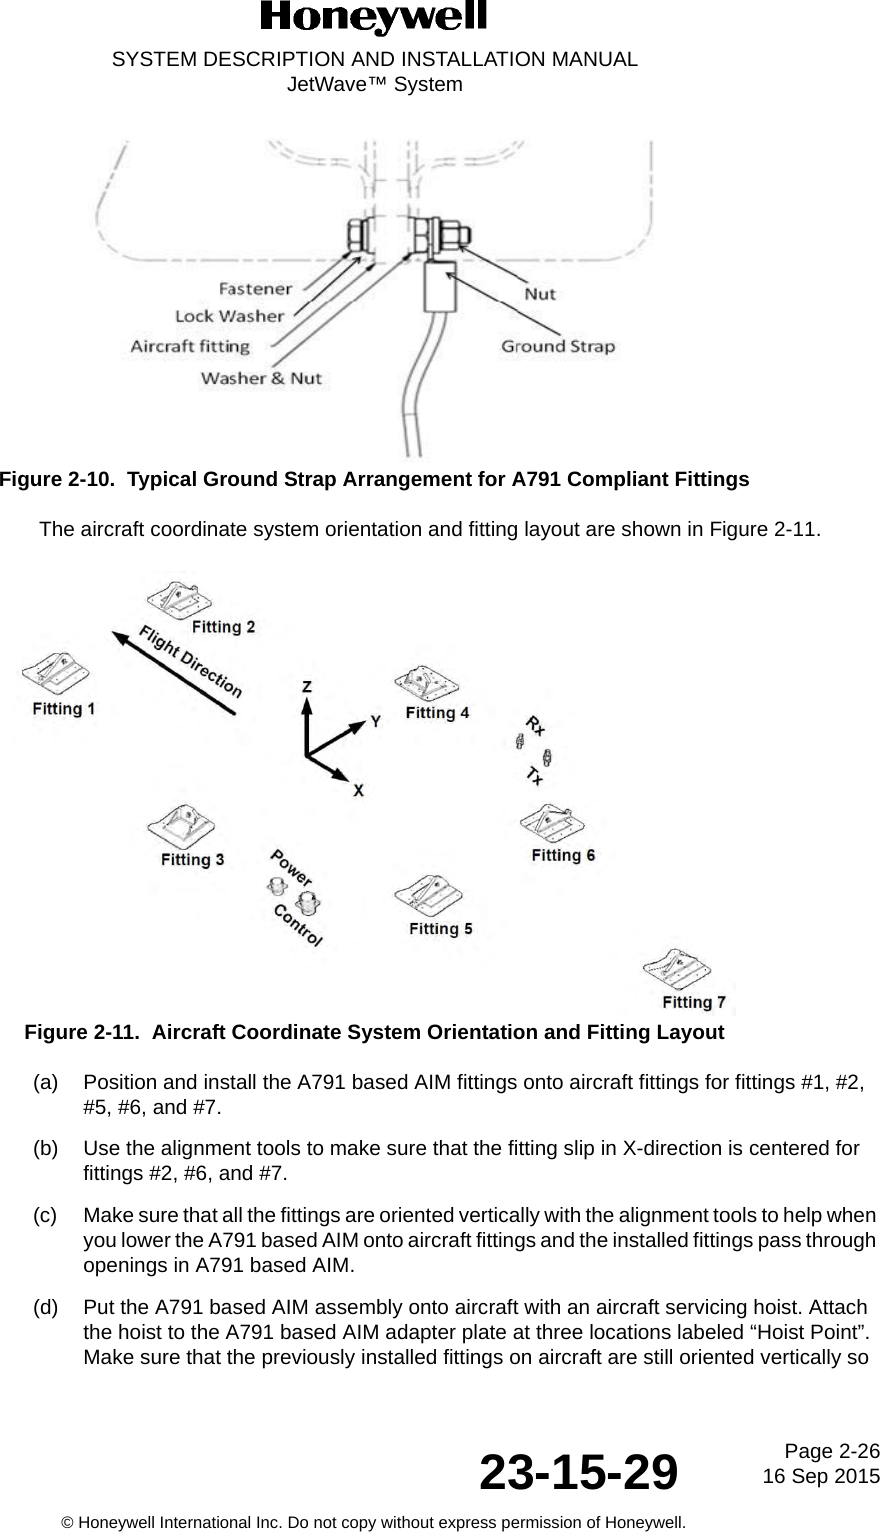 Page 2-26 16 Sep 201523-15-29SYSTEM DESCRIPTION AND INSTALLATION MANUALJetWave™ System© Honeywell International Inc. Do not copy without express permission of Honeywell.Figure 2-10.  Typical Ground Strap Arrangement for A791 Compliant FittingsThe aircraft coordinate system orientation and fitting layout are shown in Figure 2-11.Figure 2-11.  Aircraft Coordinate System Orientation and Fitting Layout (a) Position and install the A791 based AIM fittings onto aircraft fittings for fittings #1, #2, #5, #6, and #7. (b) Use the alignment tools to make sure that the fitting slip in X-direction is centered for fittings #2, #6, and #7. (c) Make sure that all the fittings are oriented vertically with the alignment tools to help when you lower the A791 based AIM onto aircraft fittings and the installed fittings pass through openings in A791 based AIM. (d) Put the A791 based AIM assembly onto aircraft with an aircraft servicing hoist. Attach the hoist to the A791 based AIM adapter plate at three locations labeled “Hoist Point”. Make sure that the previously installed fittings on aircraft are still oriented vertically so 